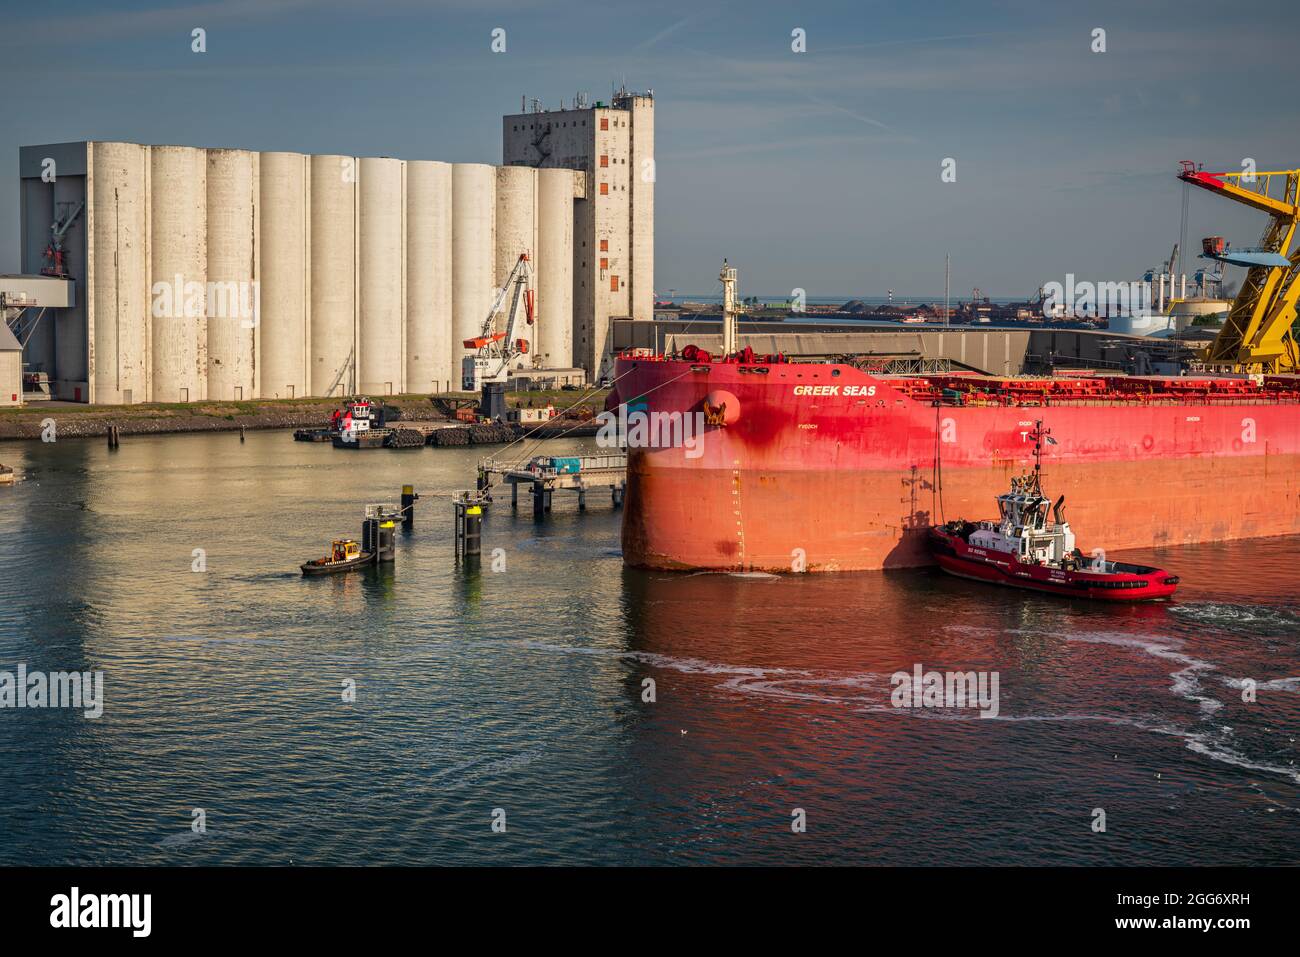 Rotterdam, South Holland, Netherlands - May 23, 2019: Ships and industry in the Beneluxhaven of Europoort Stock Photo